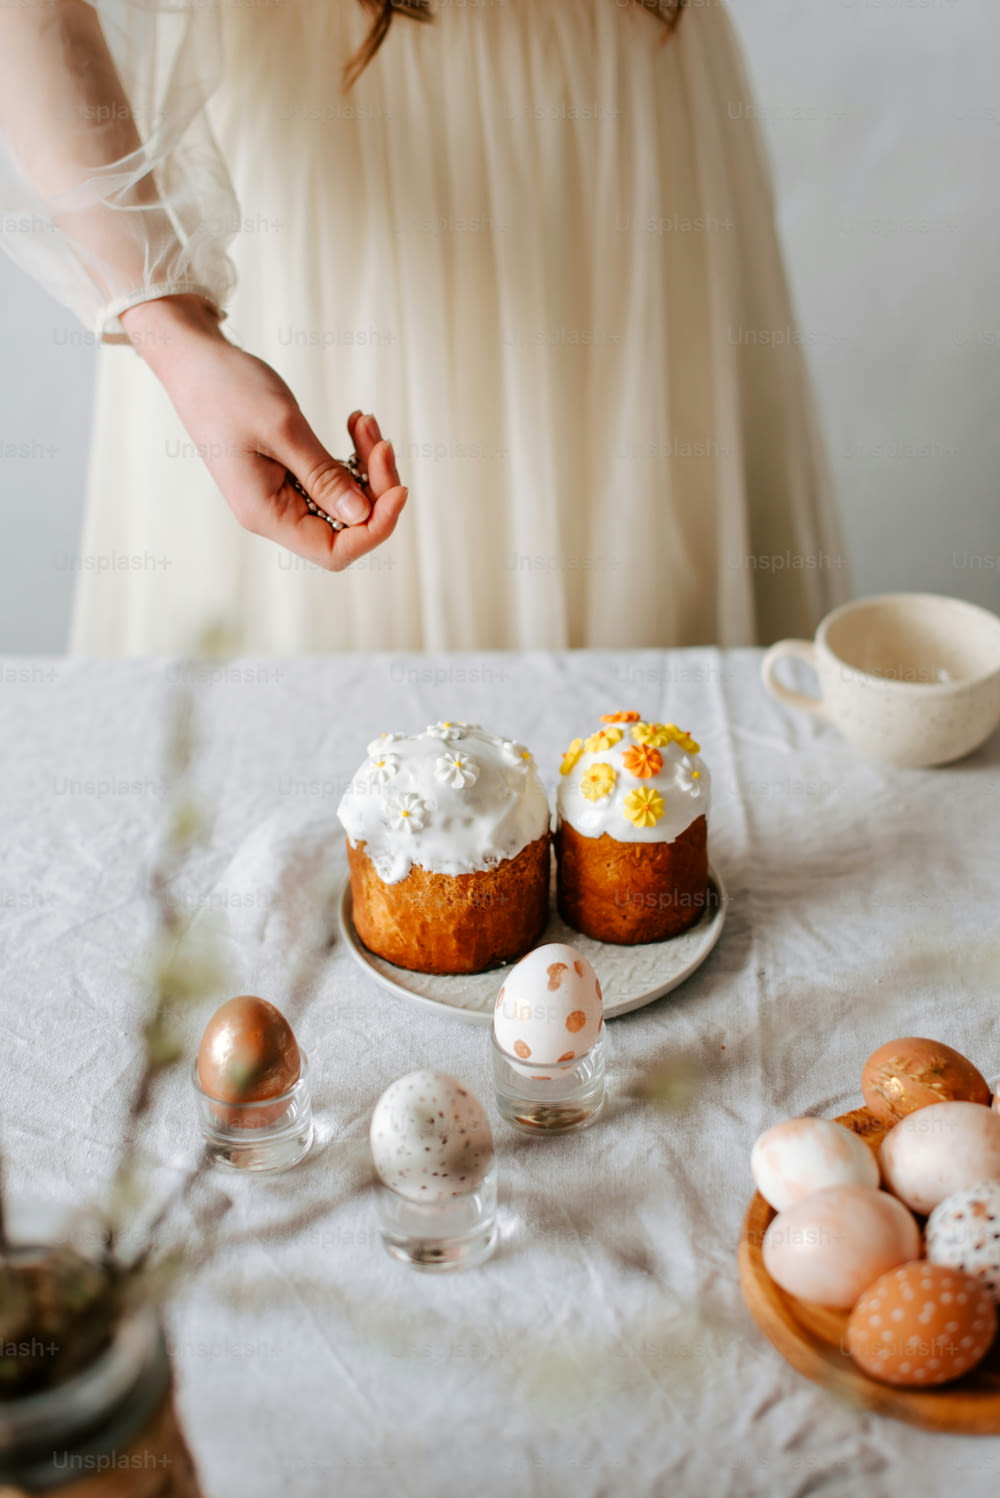 a woman in a white dress standing next to a table filled with eggs